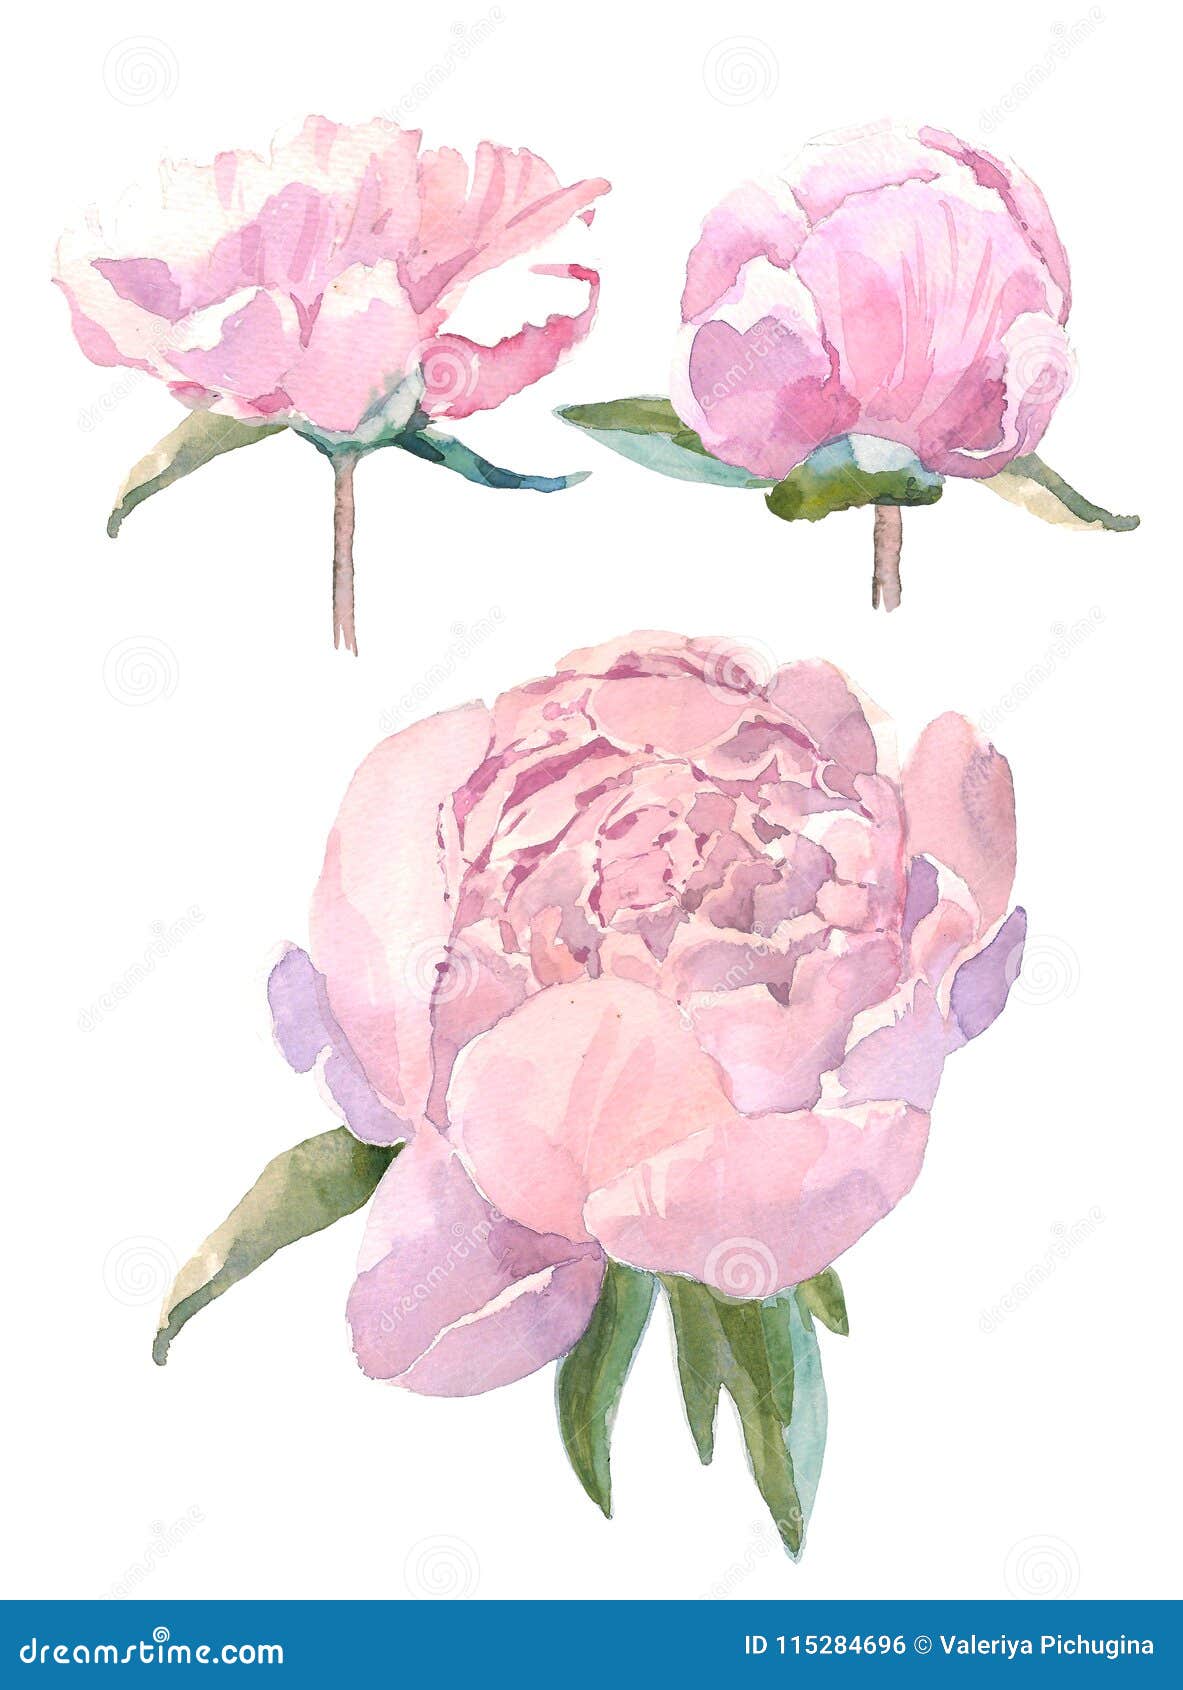 Set of Watercolor Illustration Vintage Bouquet of Flowers, Peonies. Hand  Drawn Illustration Isolated on White Background Stock Illustration -  Illustration of drawing, floral: 115284696